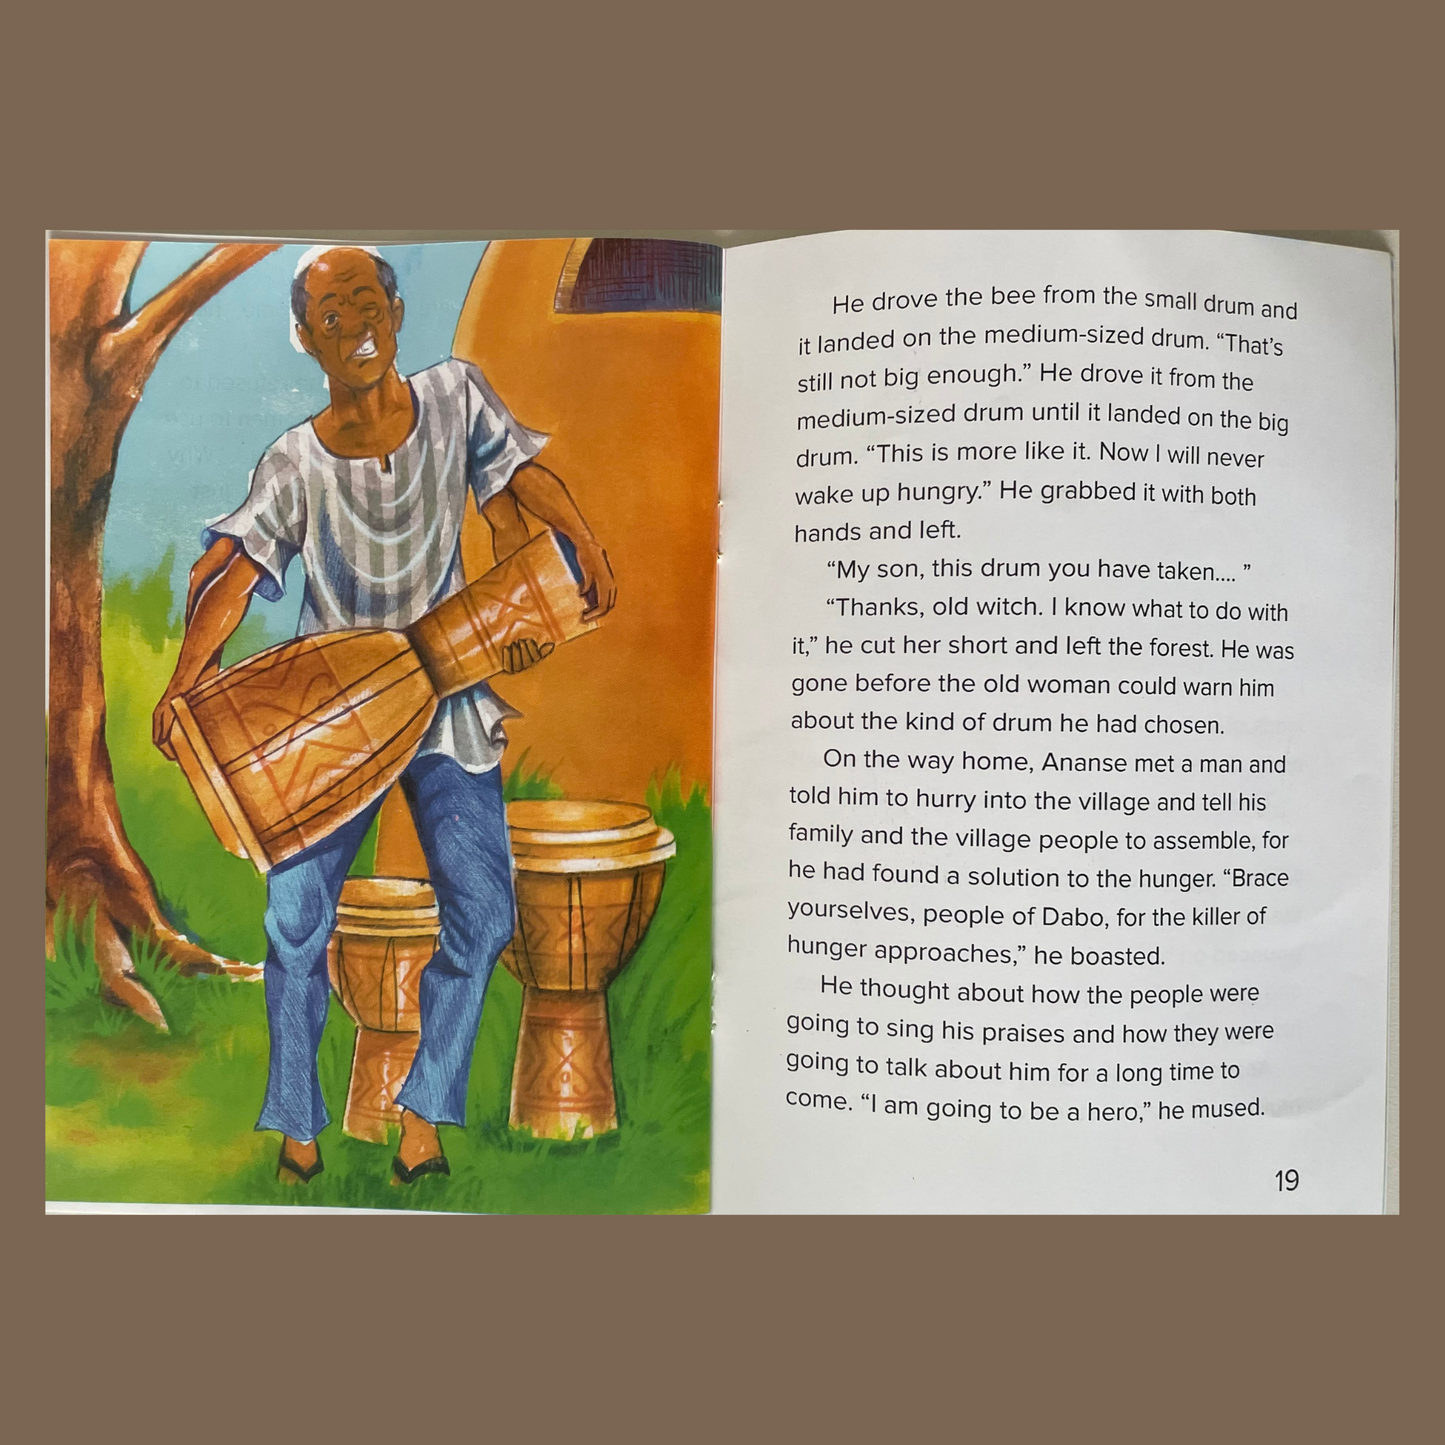 Ananse and the big magic drum